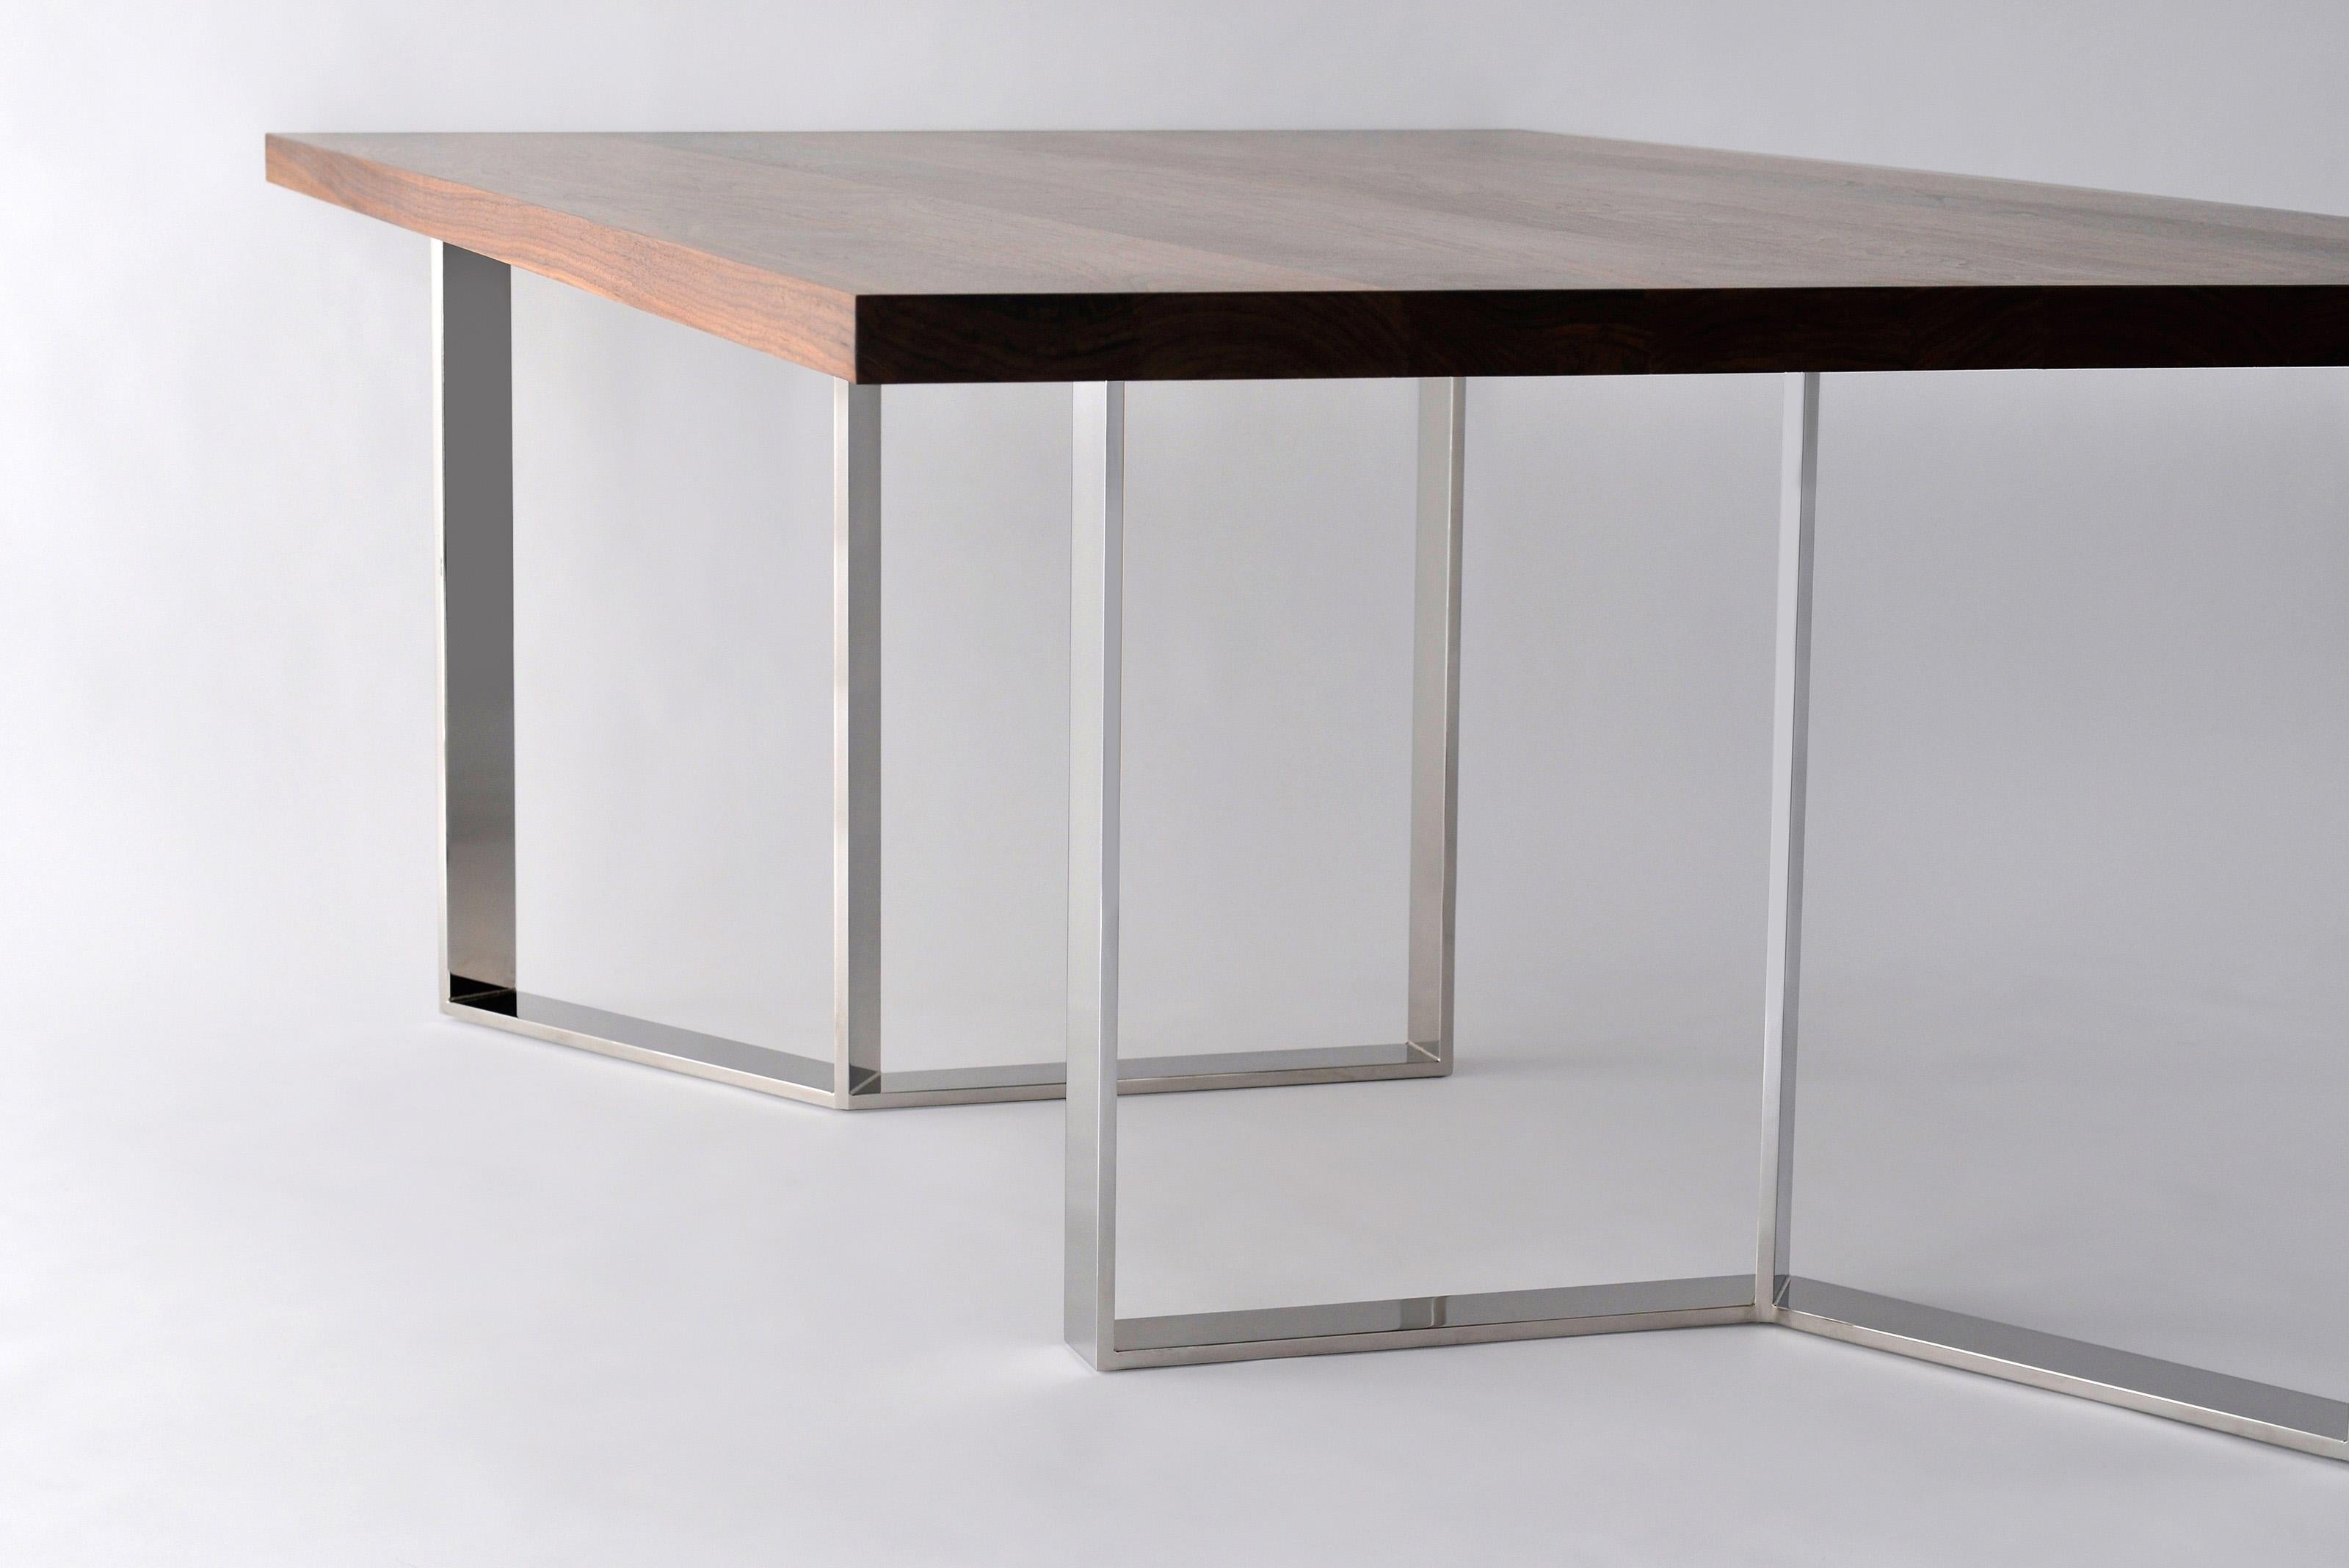 American Roundhouse Table by Phase Design For Sale